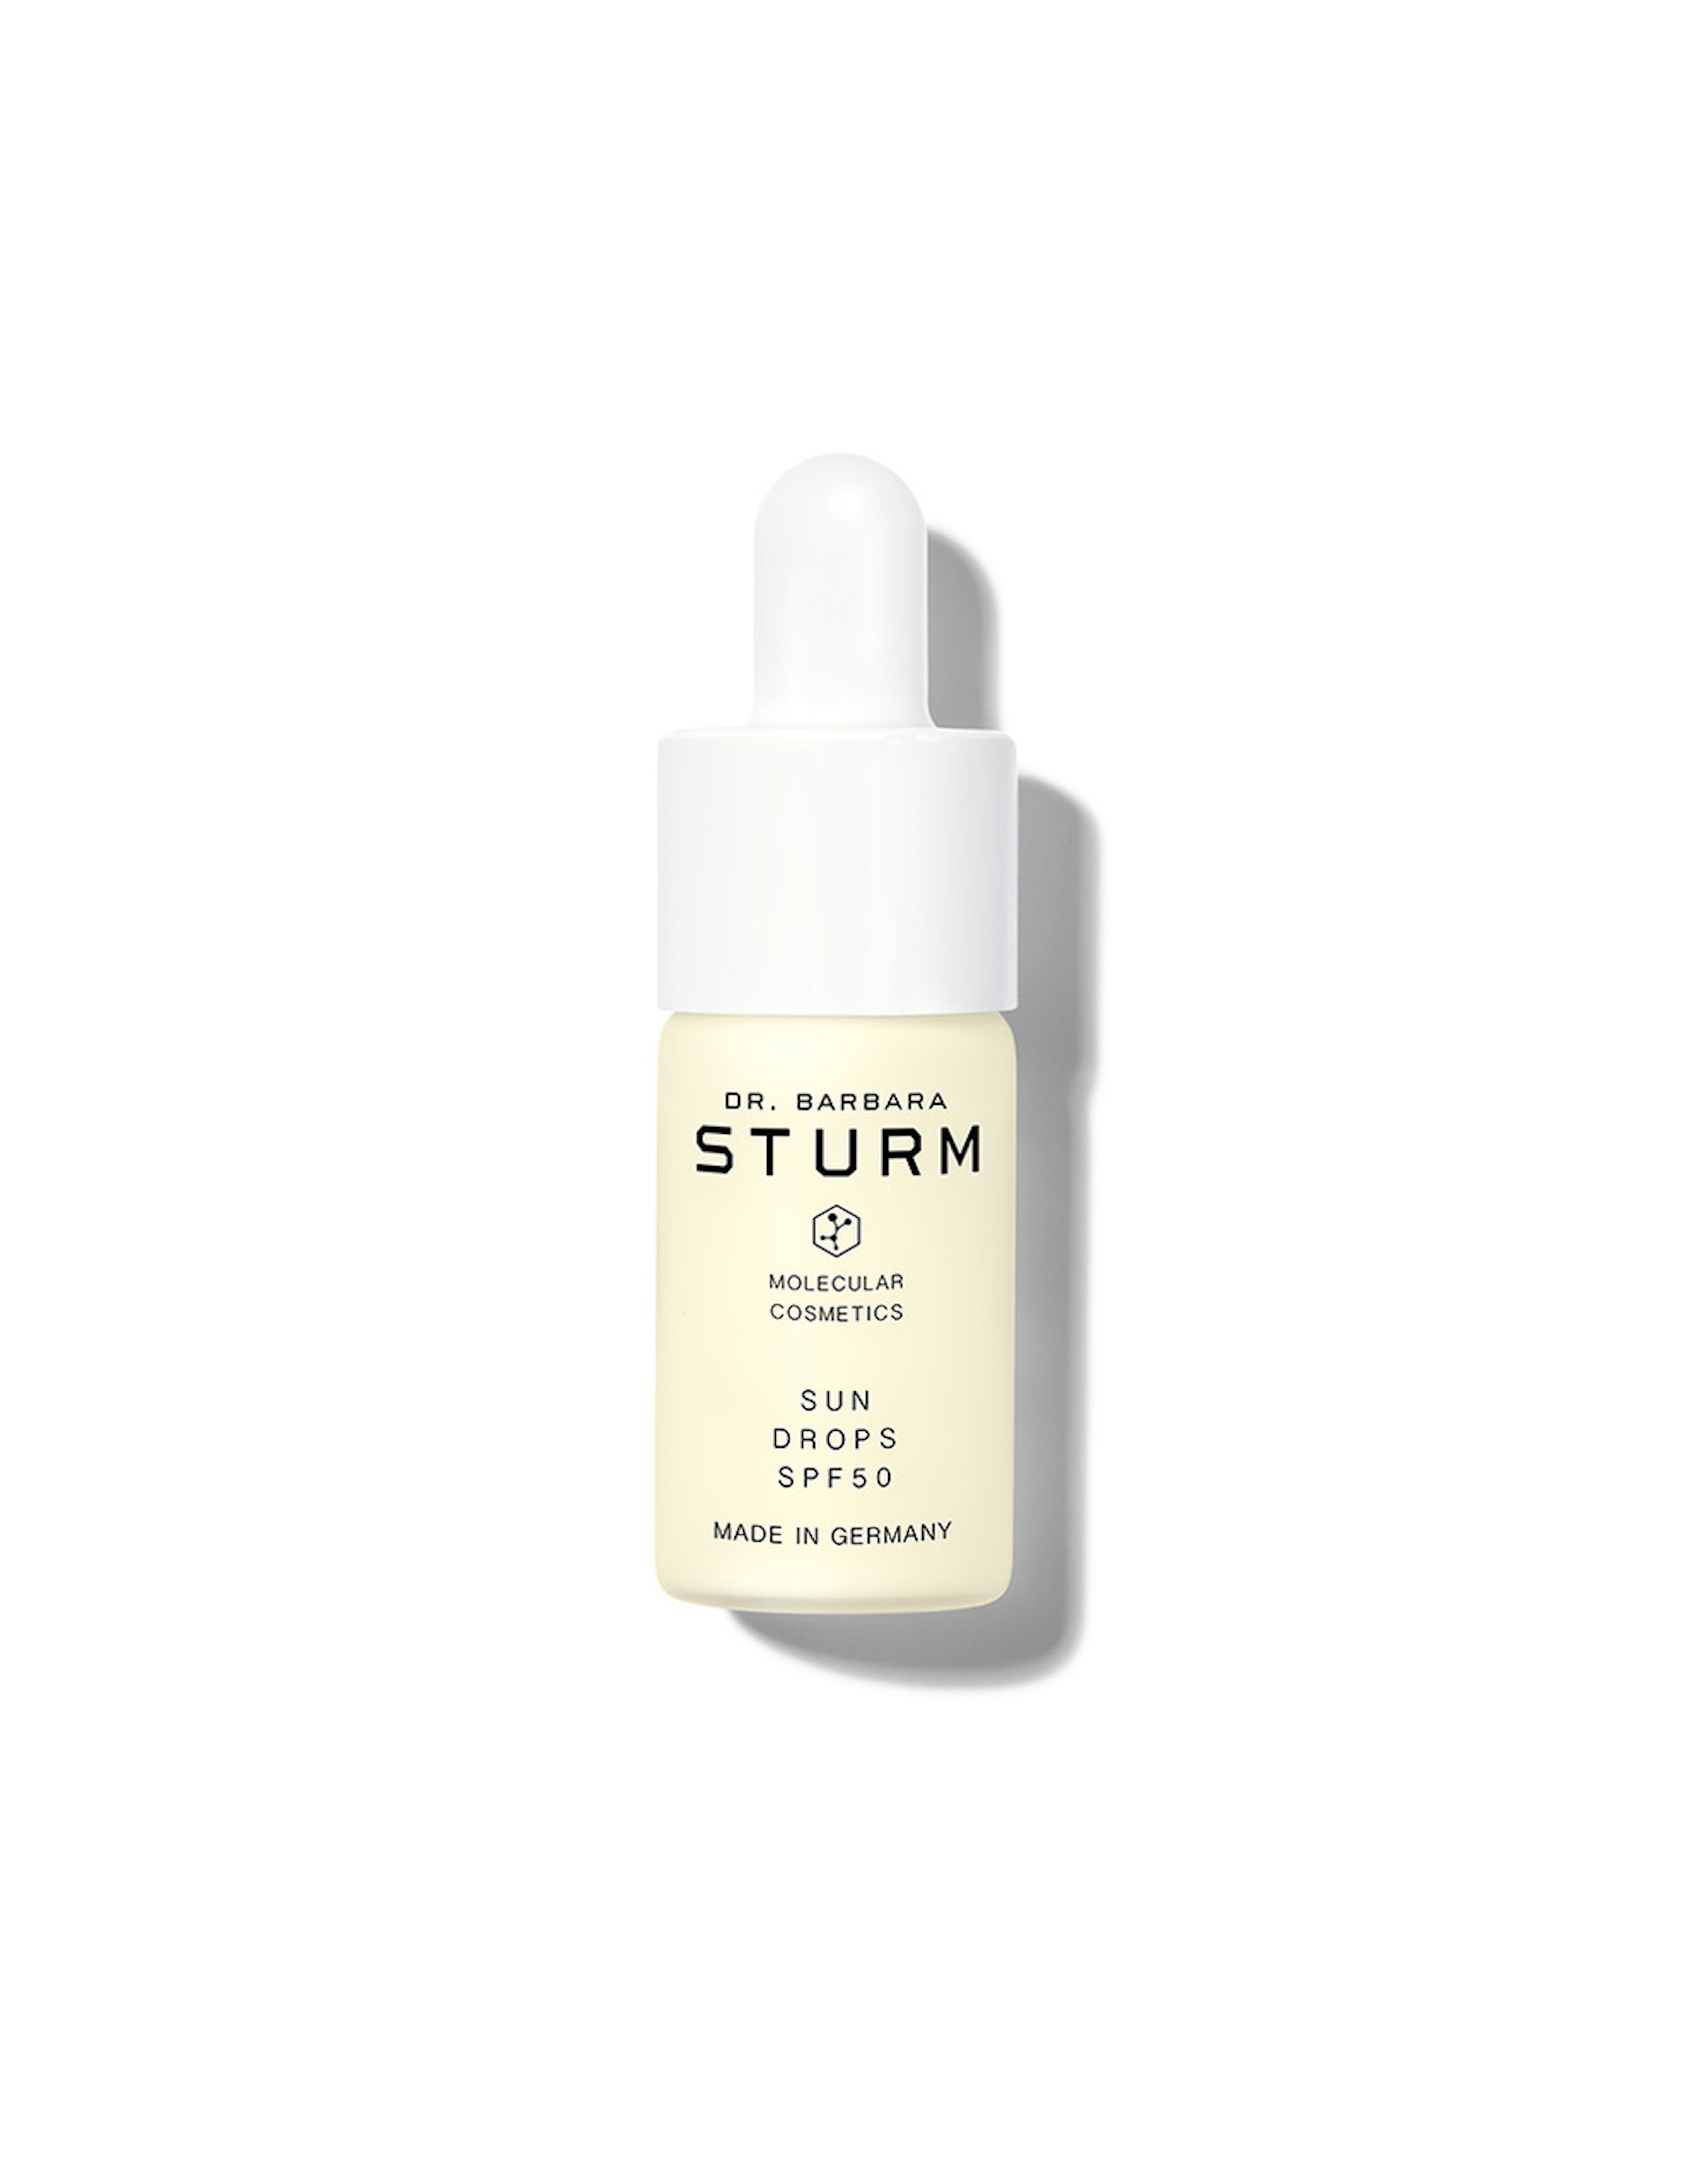 Dr. Barbara Sturm Mini Sun Drops SPF 50 – A holy grail product, giving you double the benefits. 